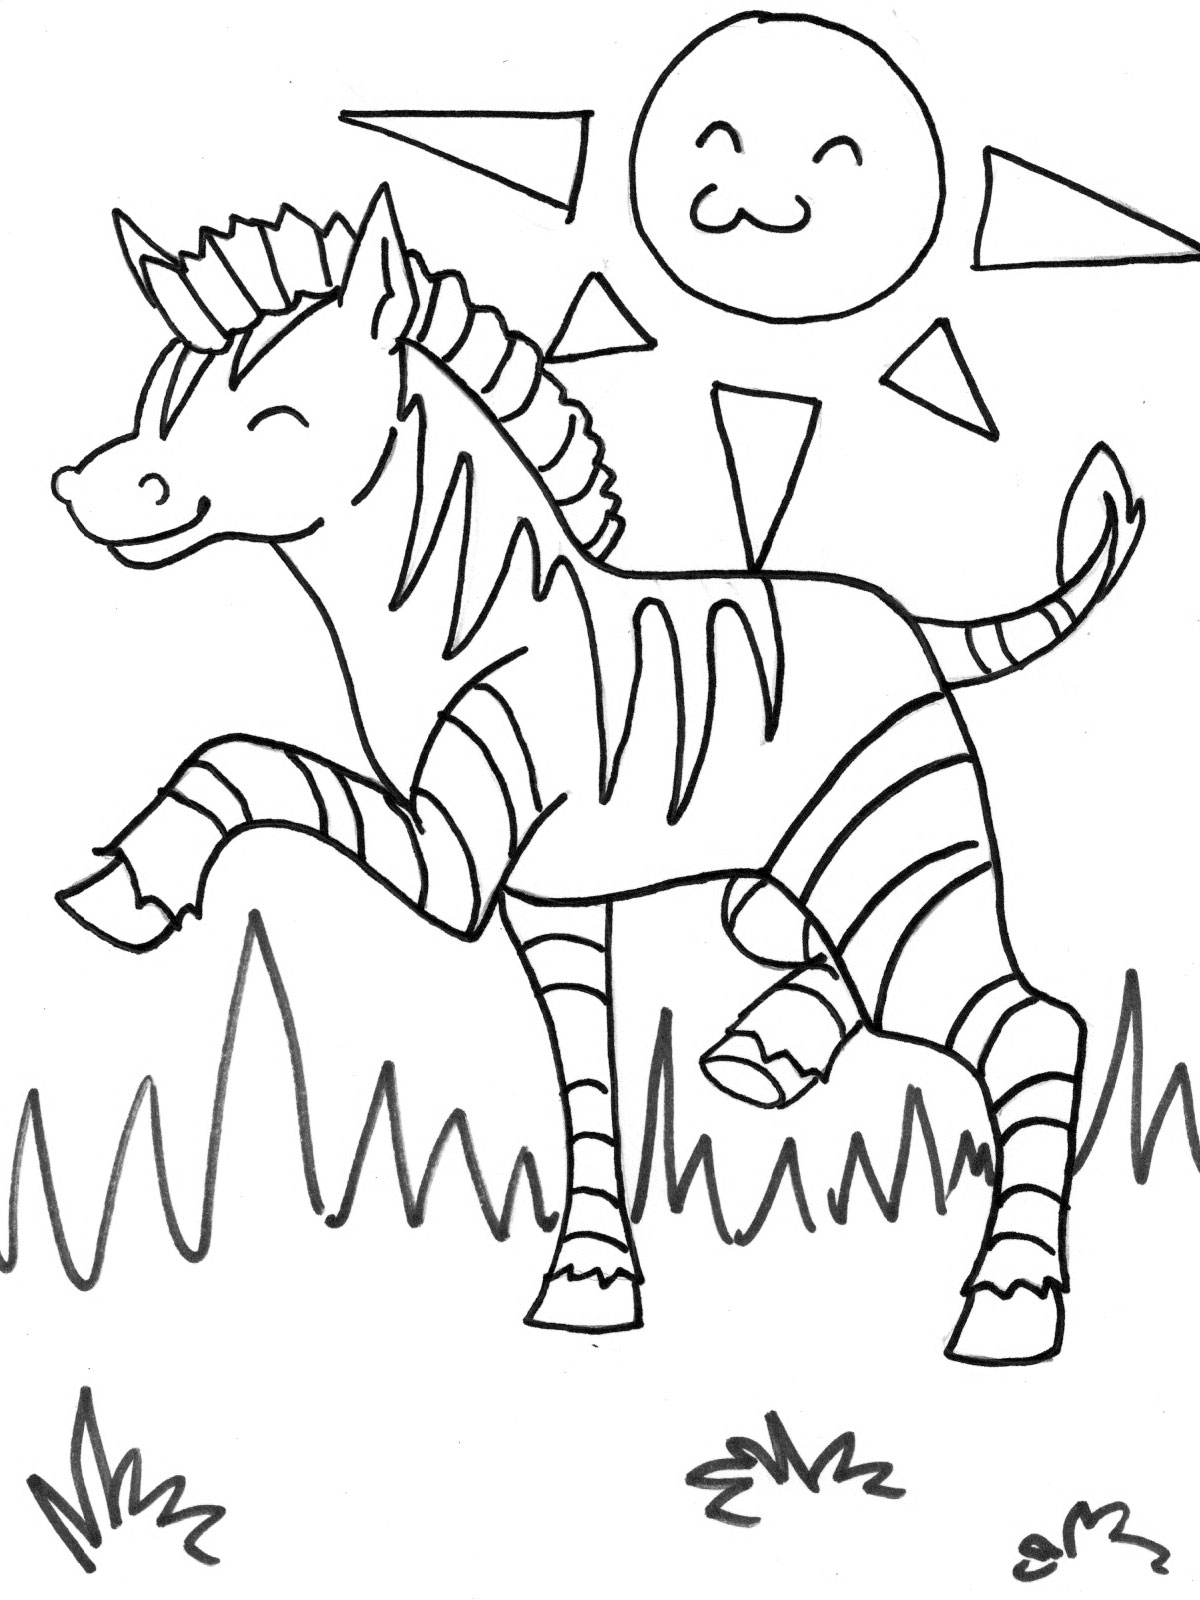 Marty zebra coloring pages download and print for free